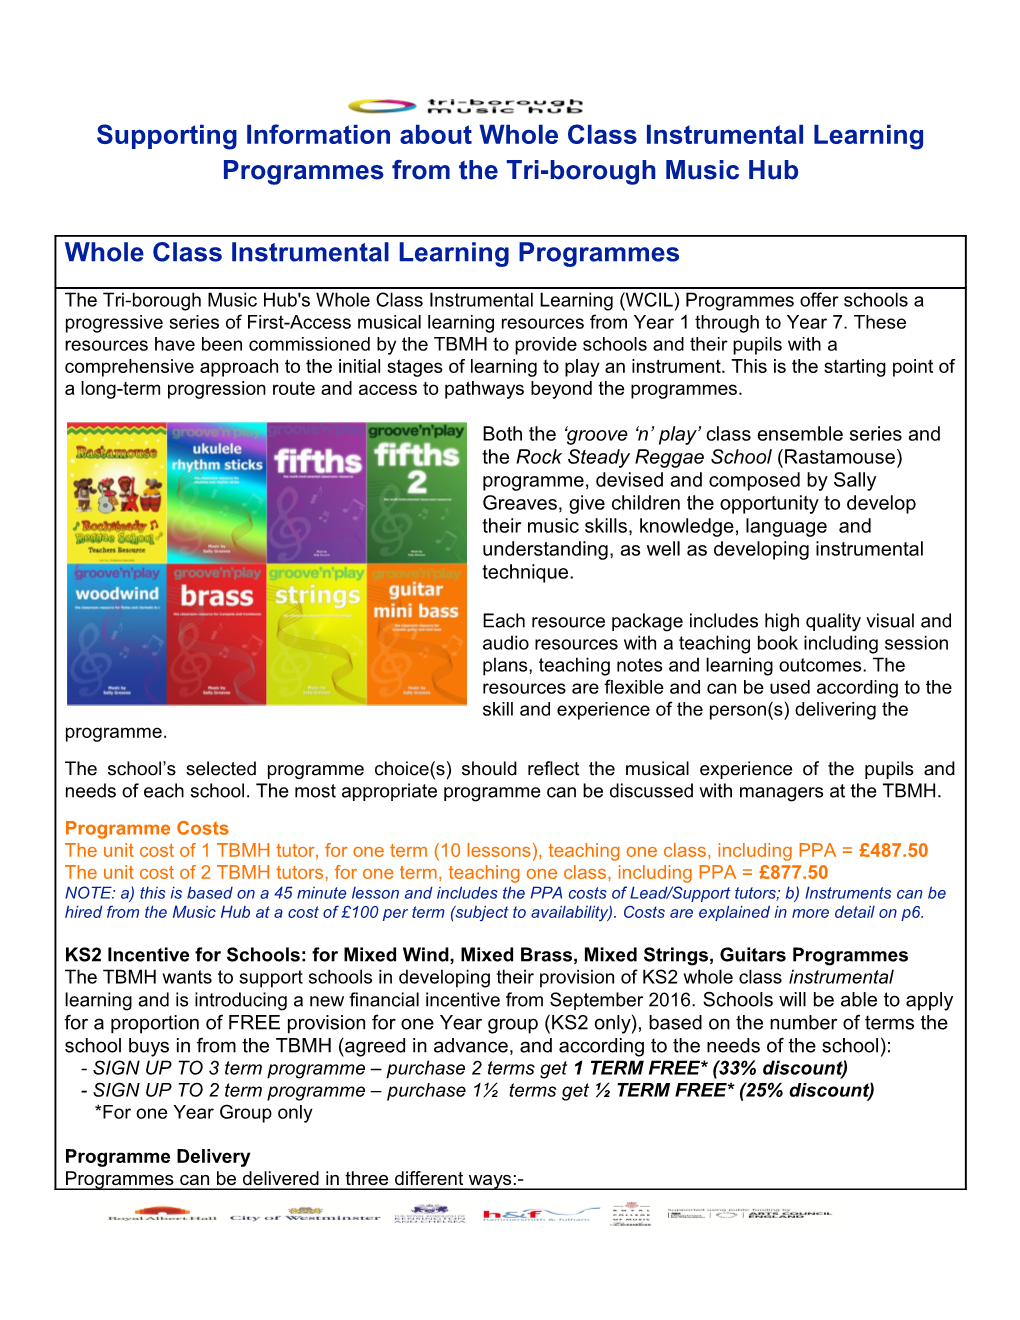 Supporting Information About Whole Class Instrumental Learning Programmes from the Tri-Borough